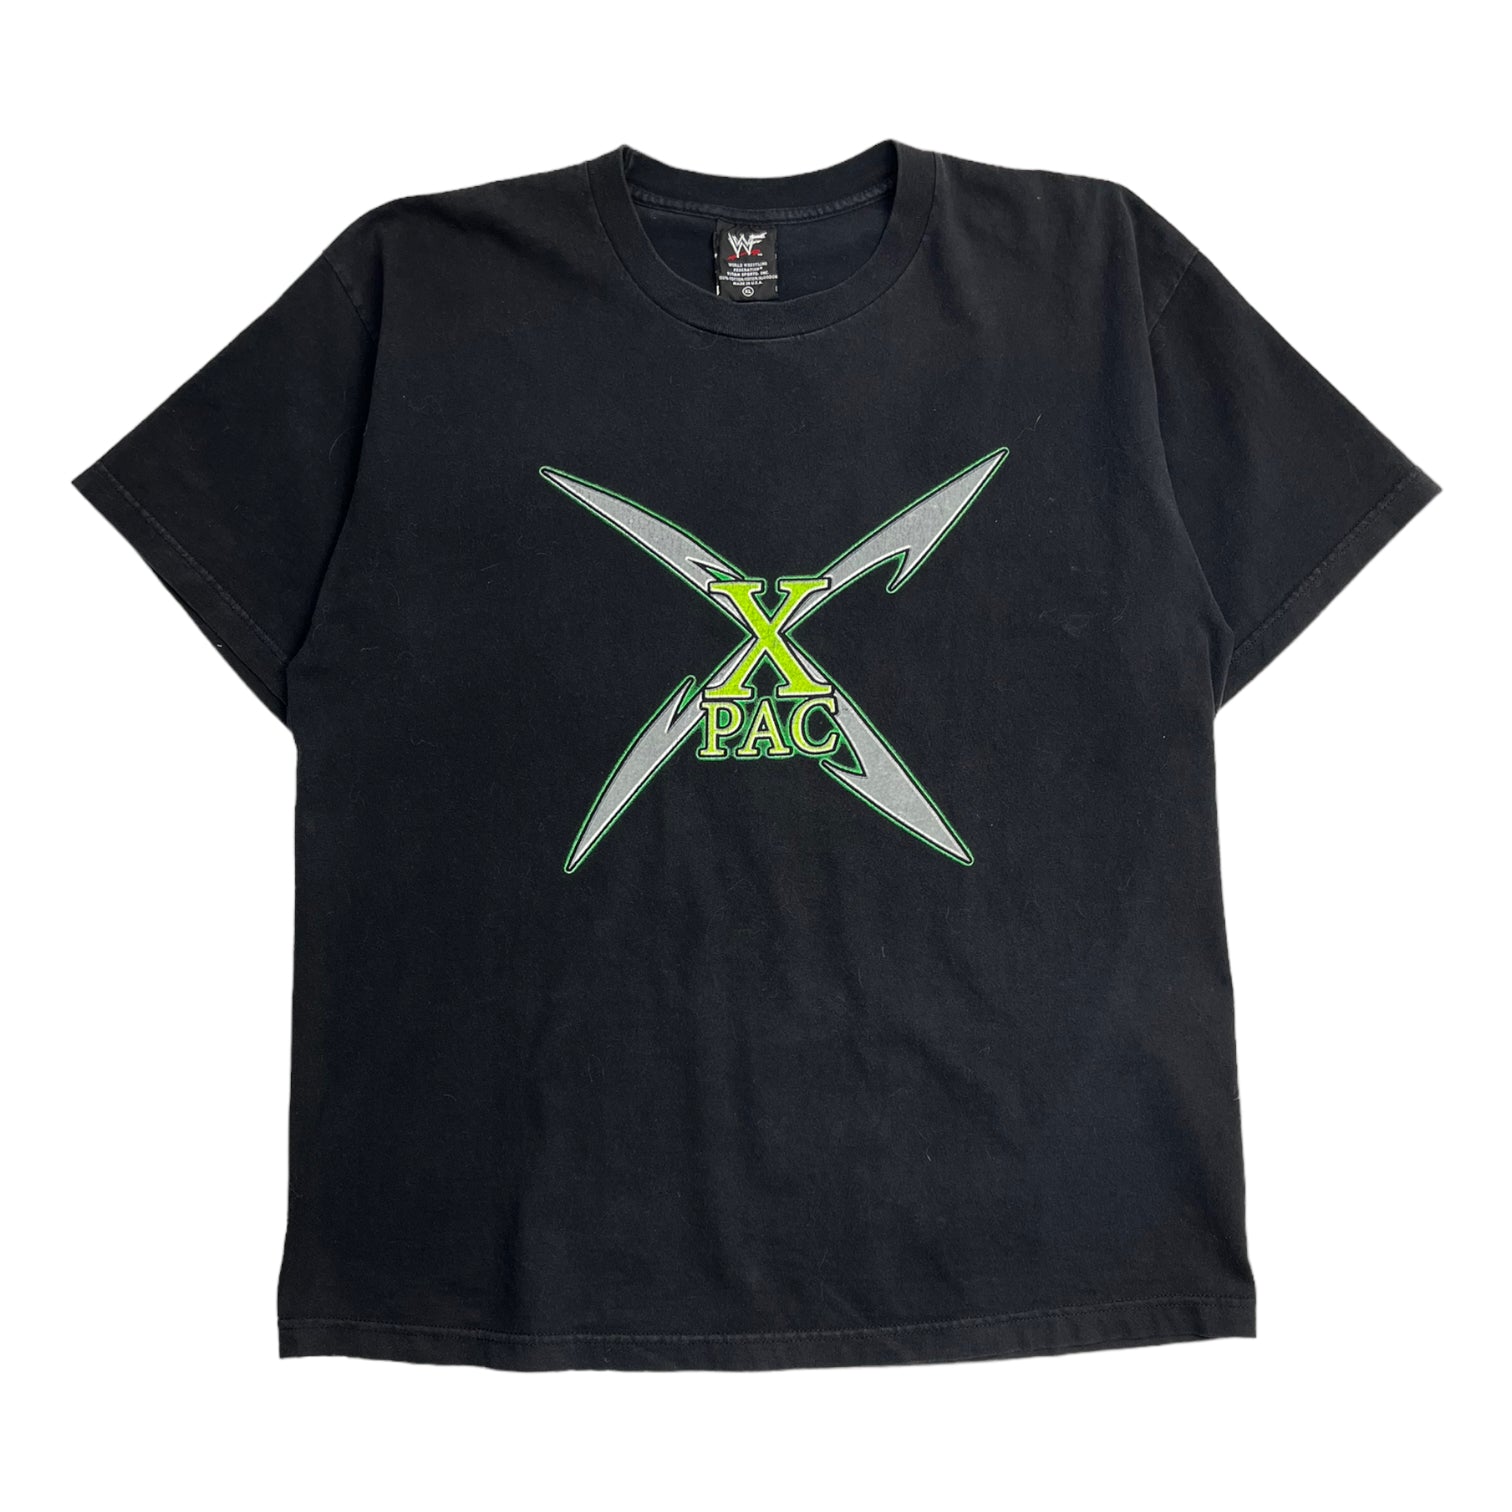 Vintage Wrestling XPAC “Your A** Is Grass…” Tee